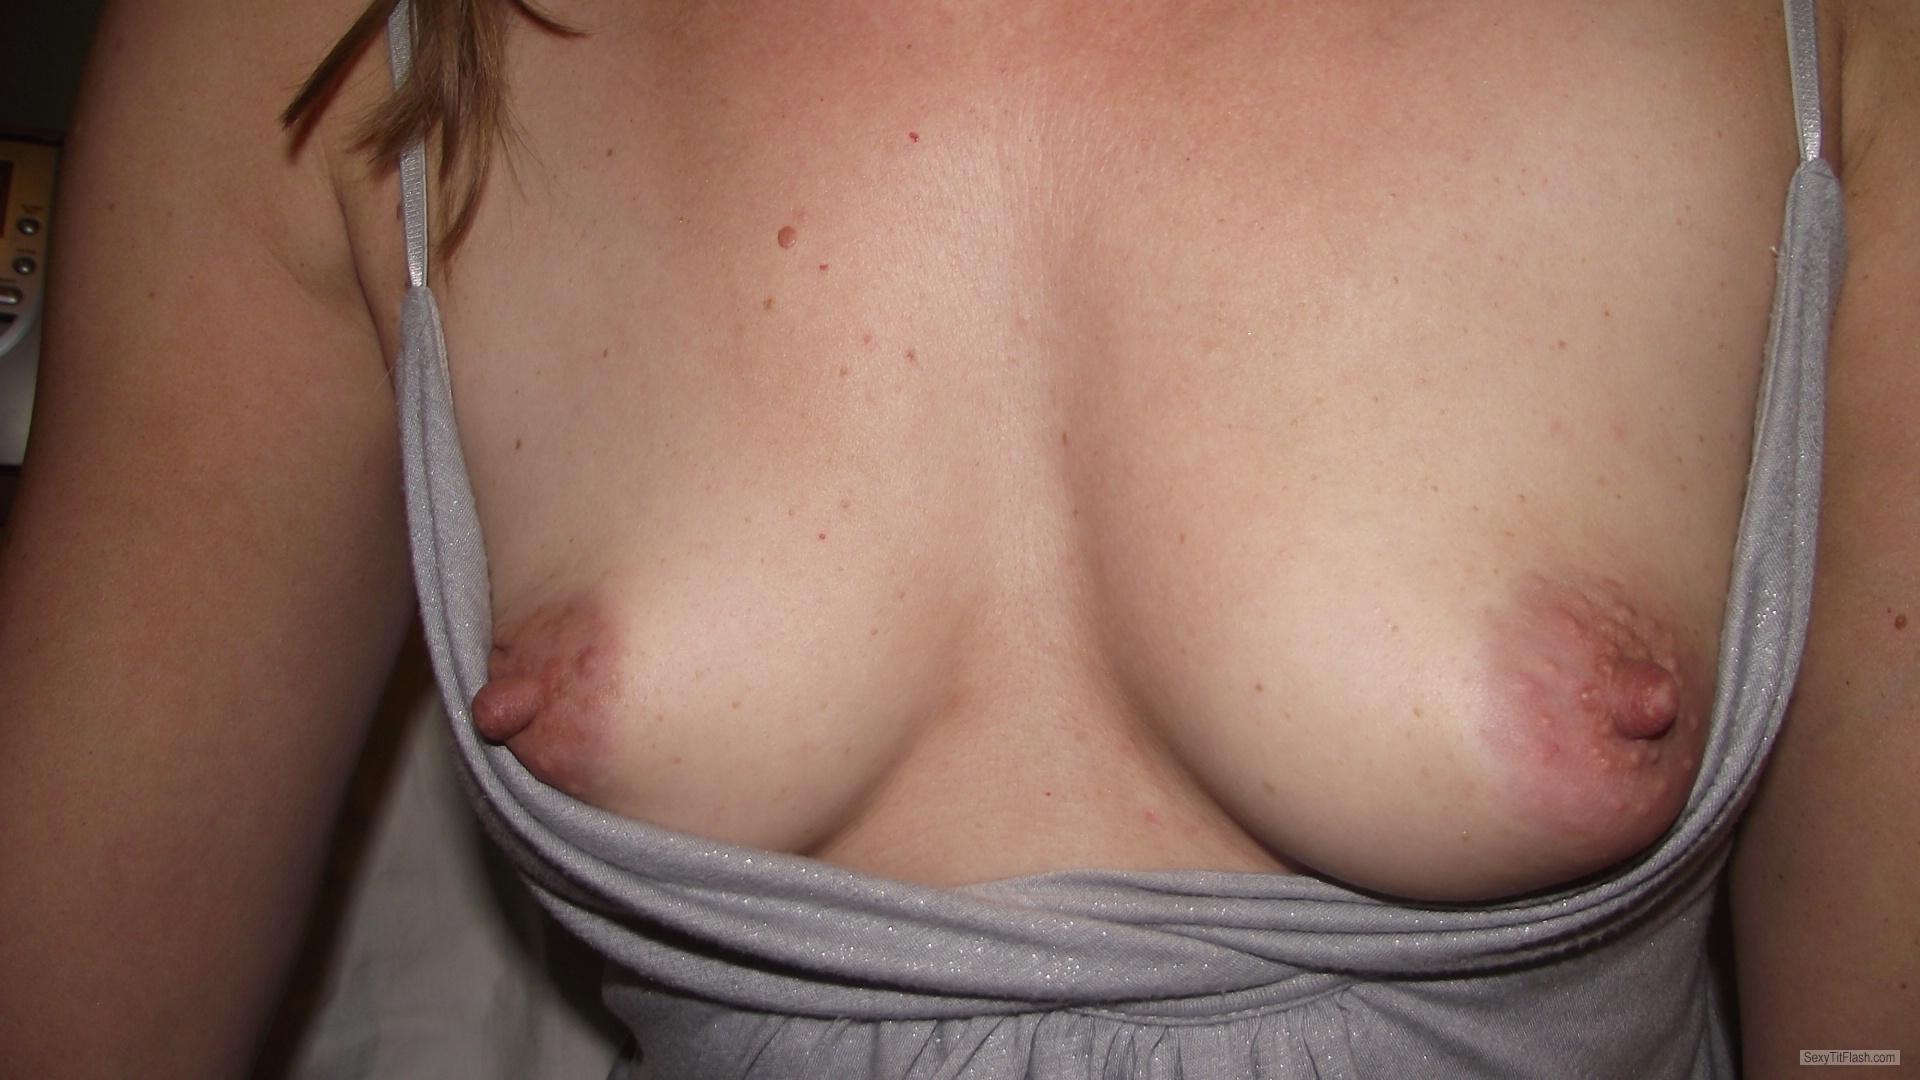 Tit Flash: My Very Small Tits (Selfie) - Puffy from United States